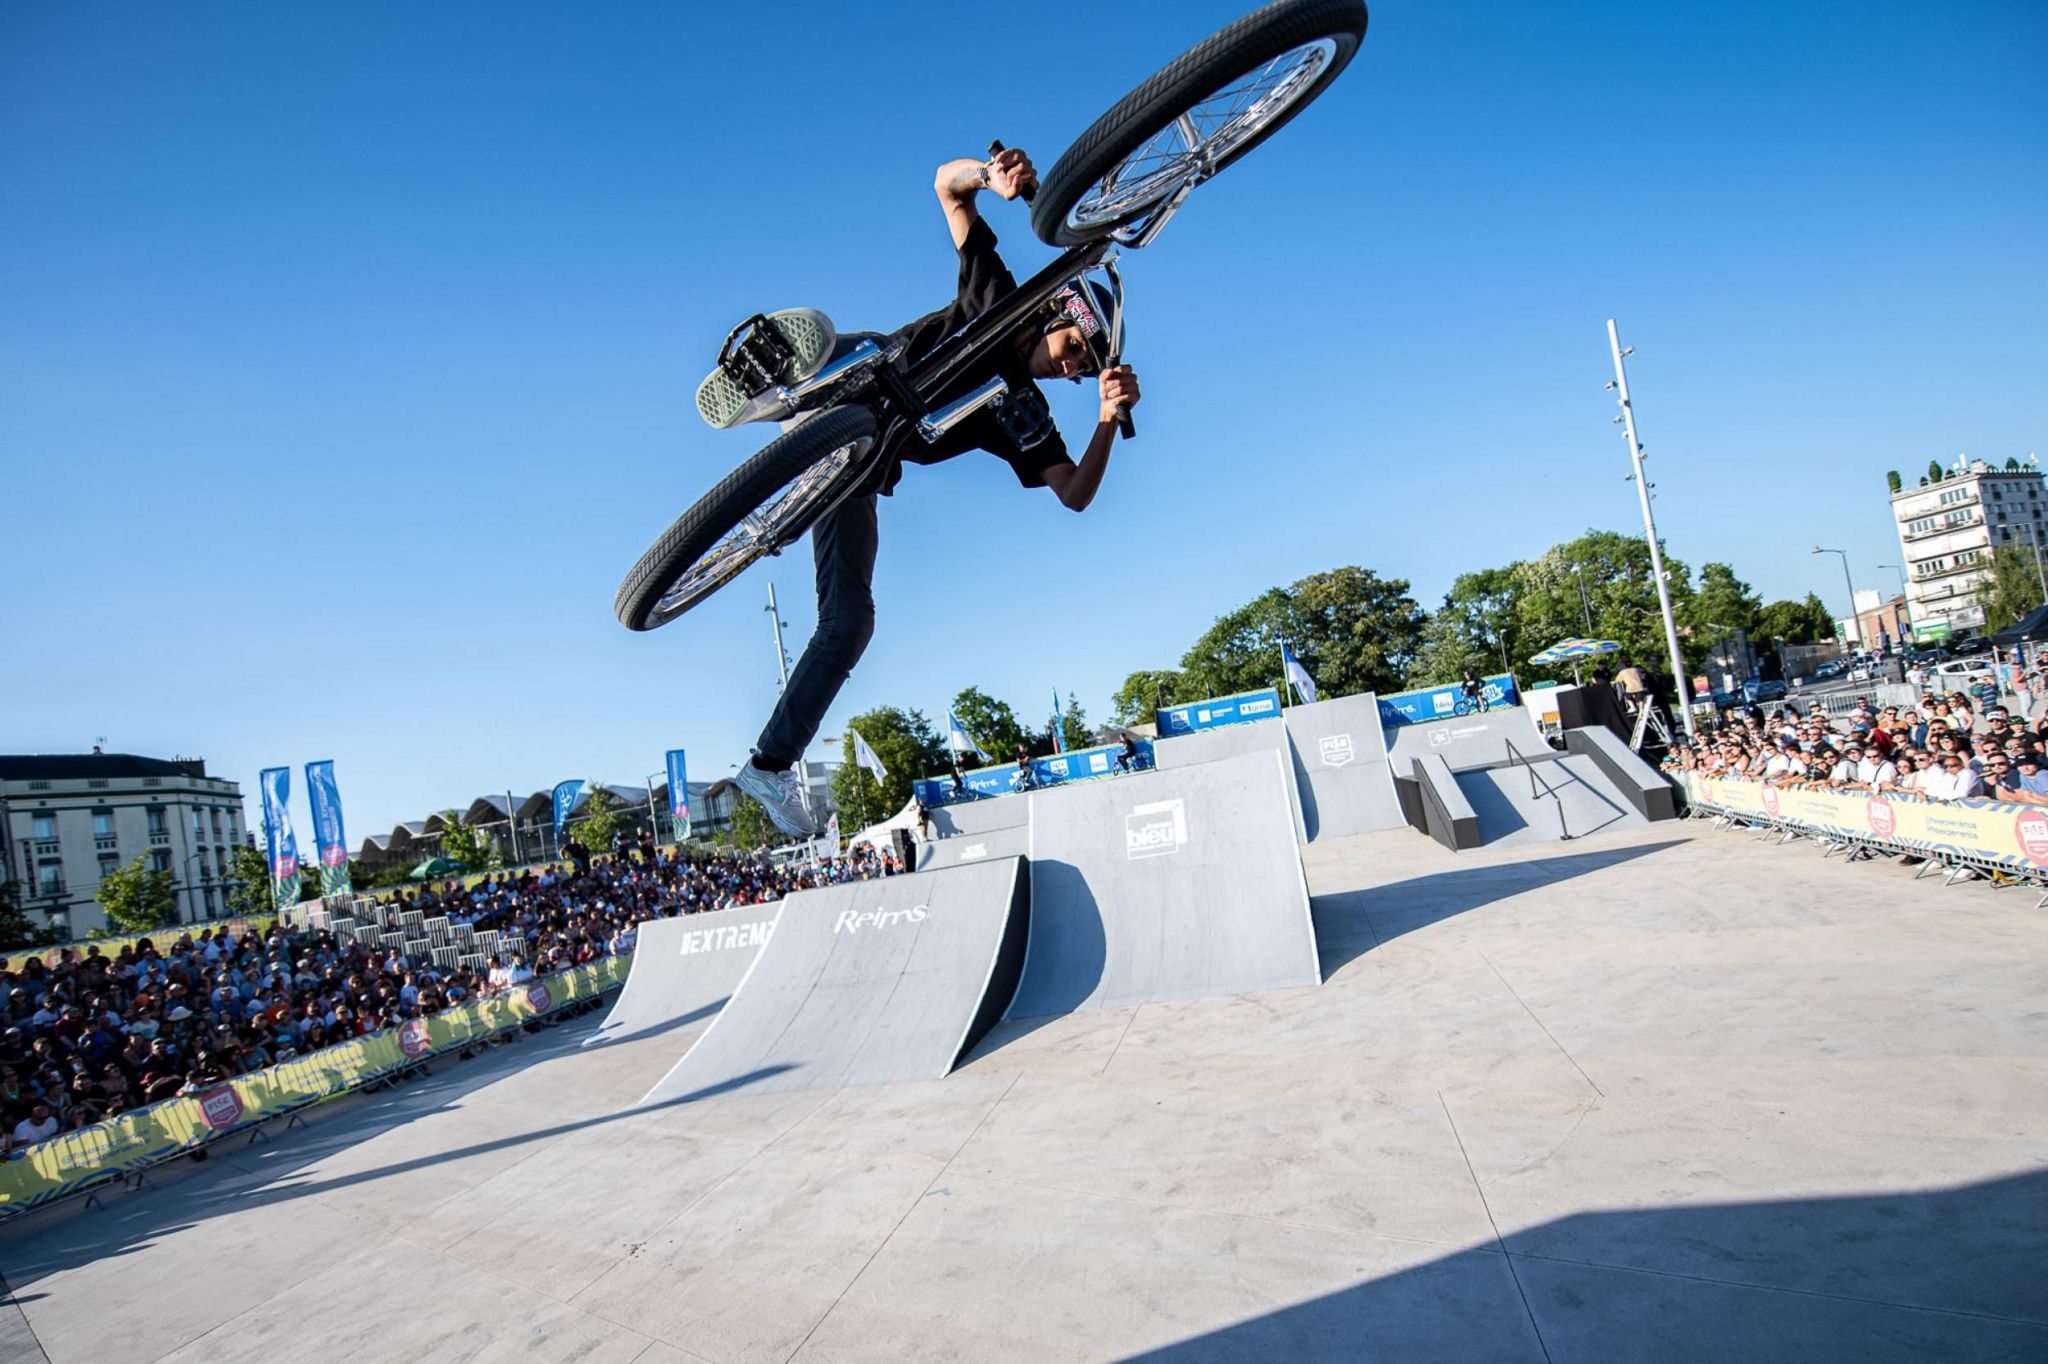 A BMX rider at a previous FISE event in Reims, France